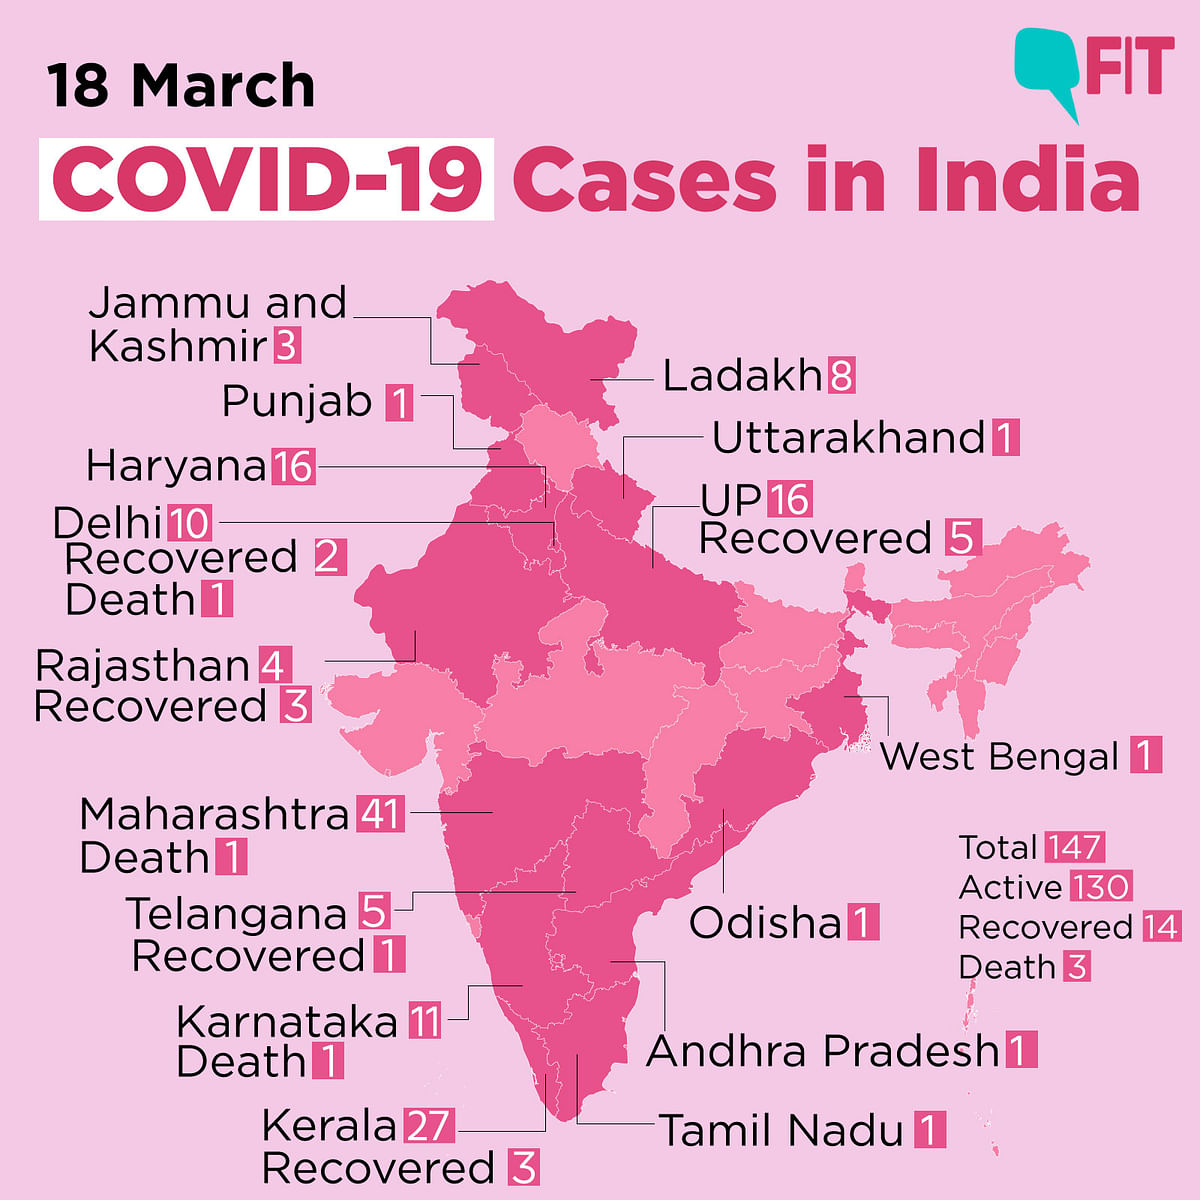 COVID-19 India Updates: 147 Total Cases in India, 14 Recovered